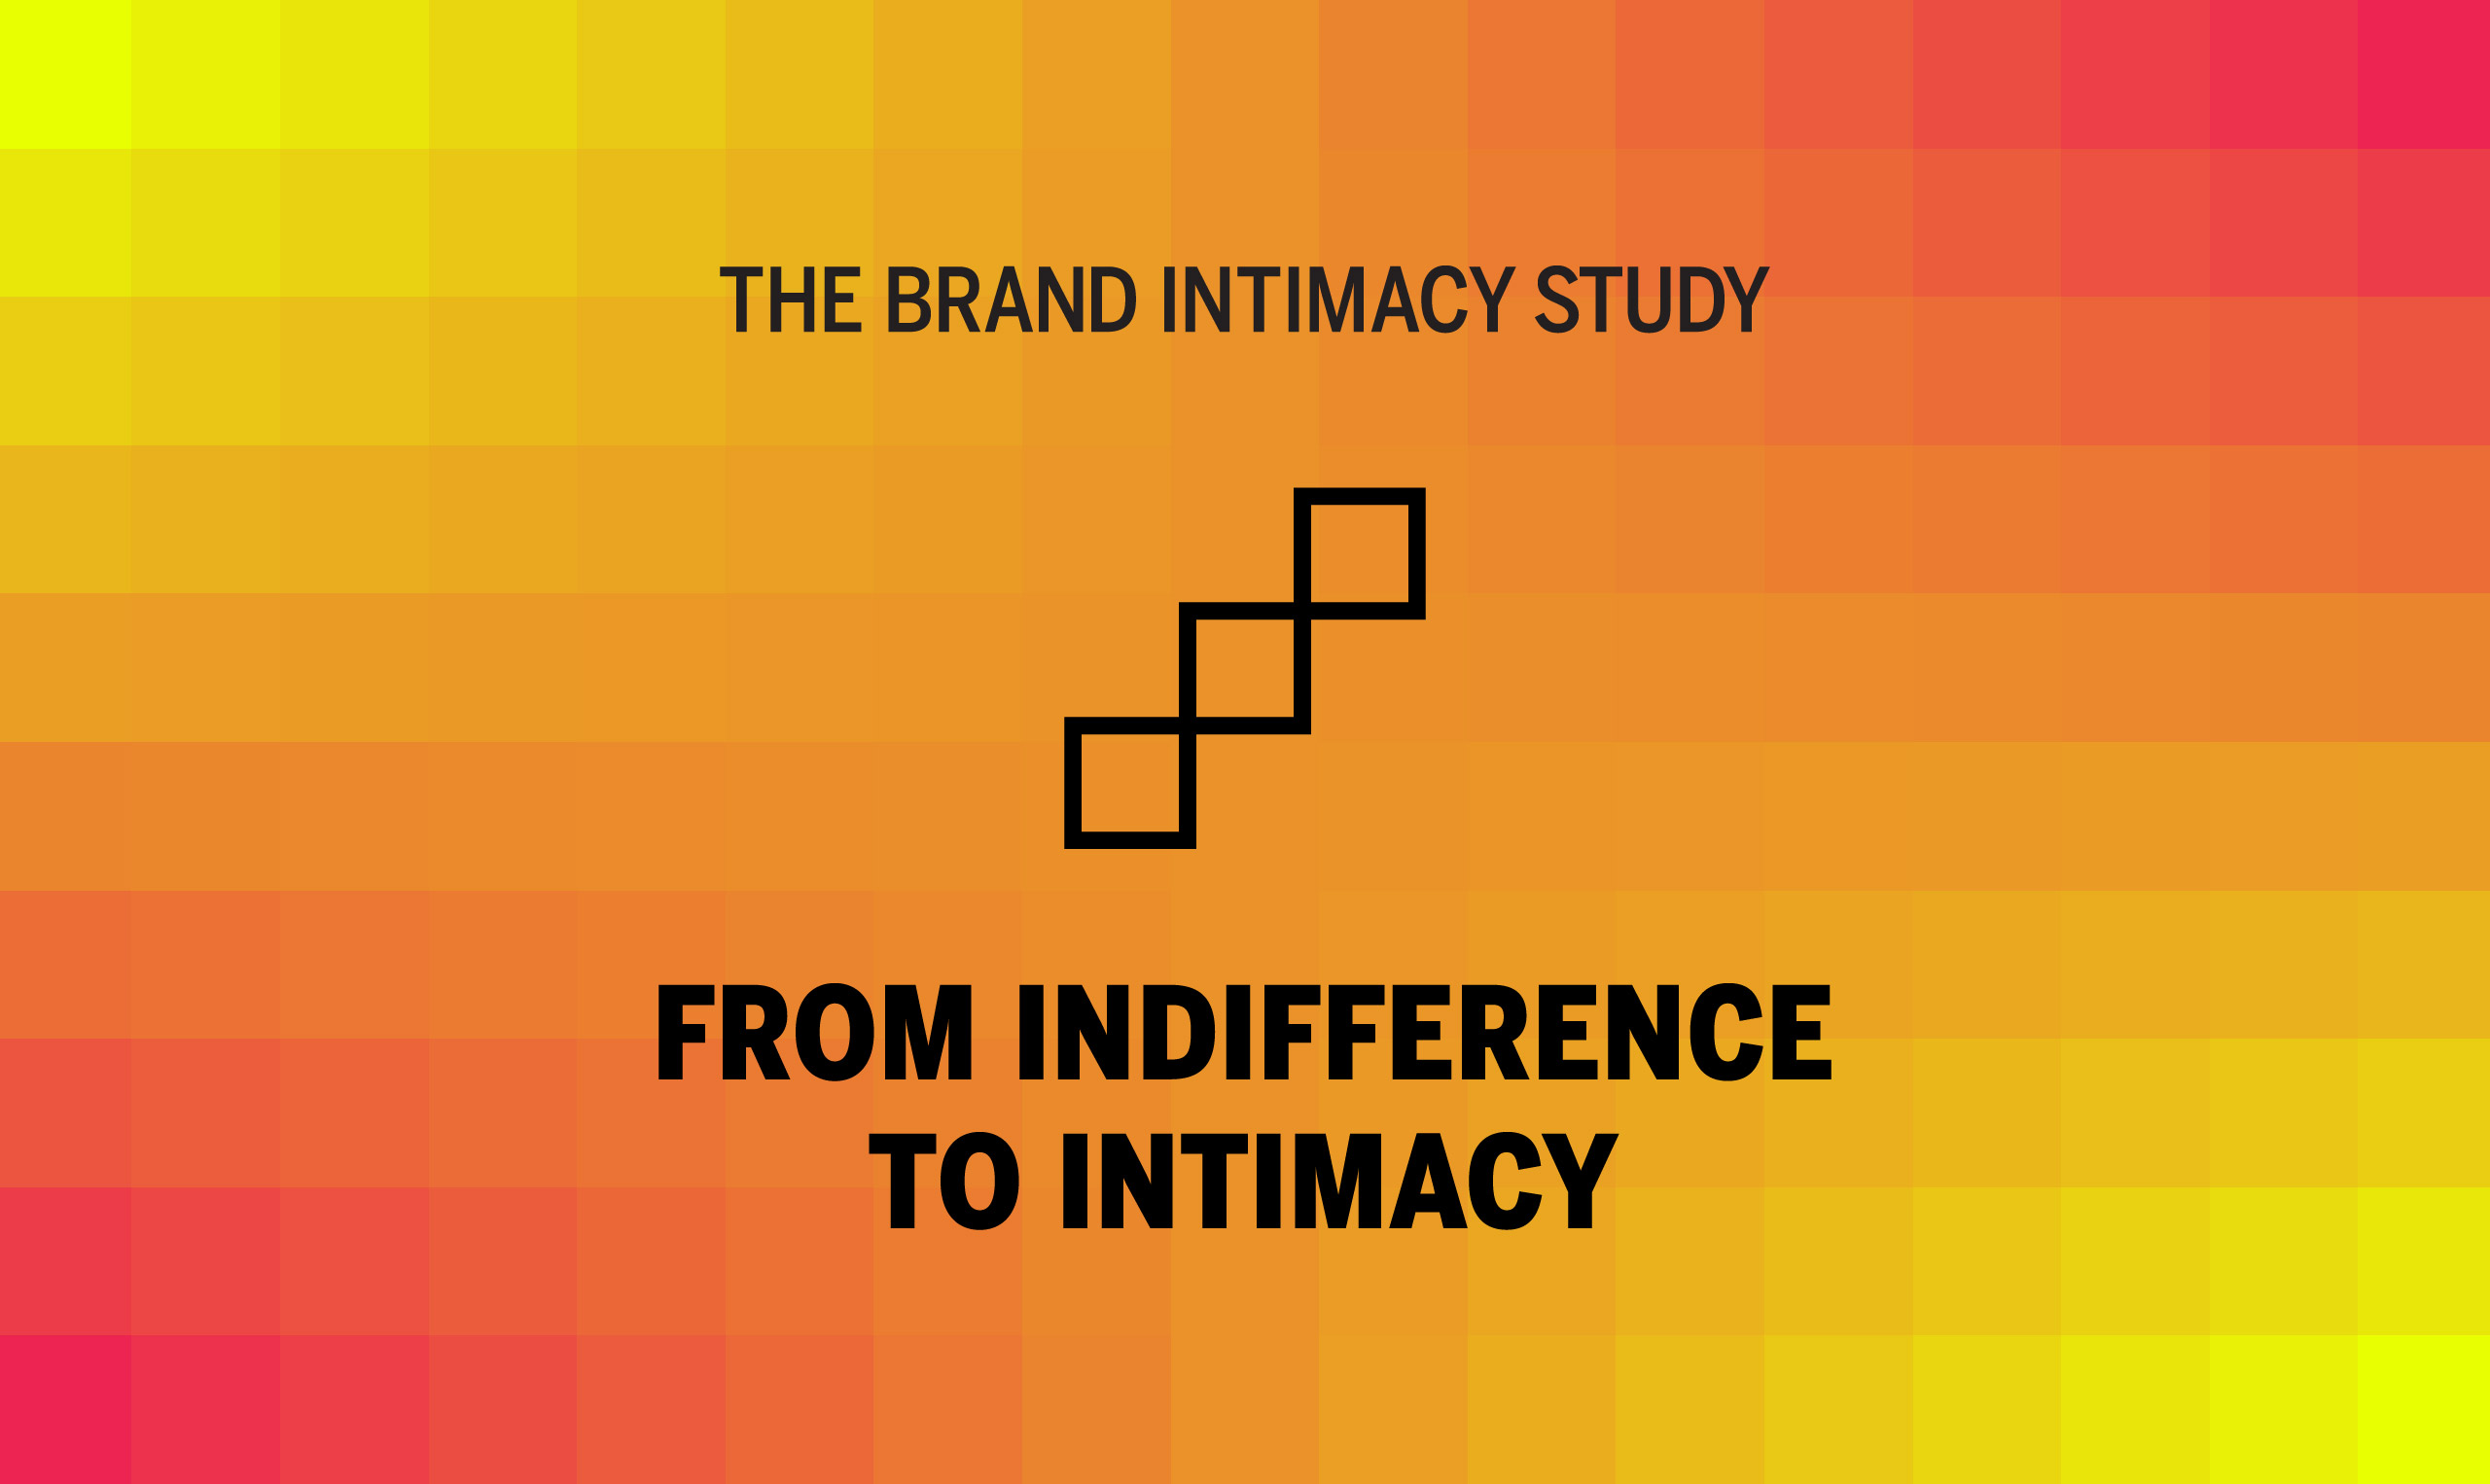 The brand intimacy study from indifference to intimacy.